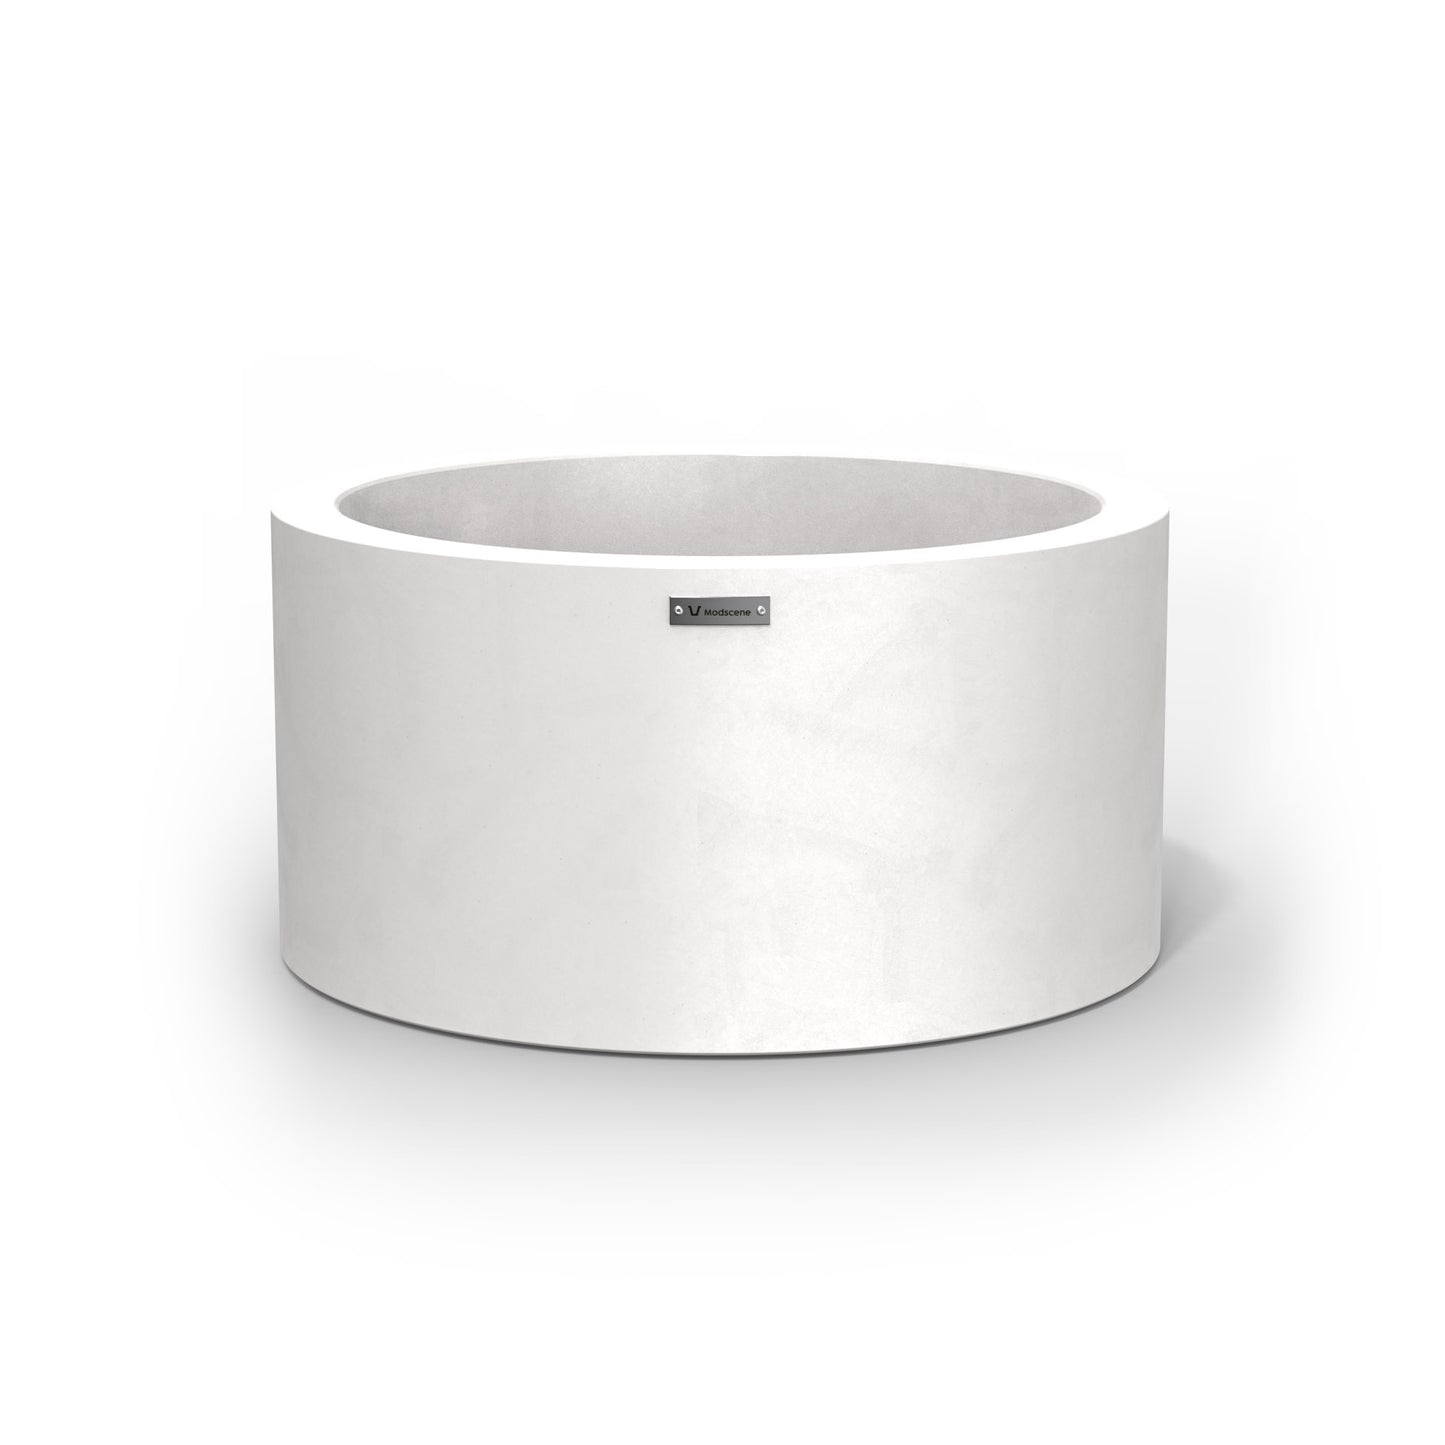 A cylinder shaped pot planter in a matte white colour.